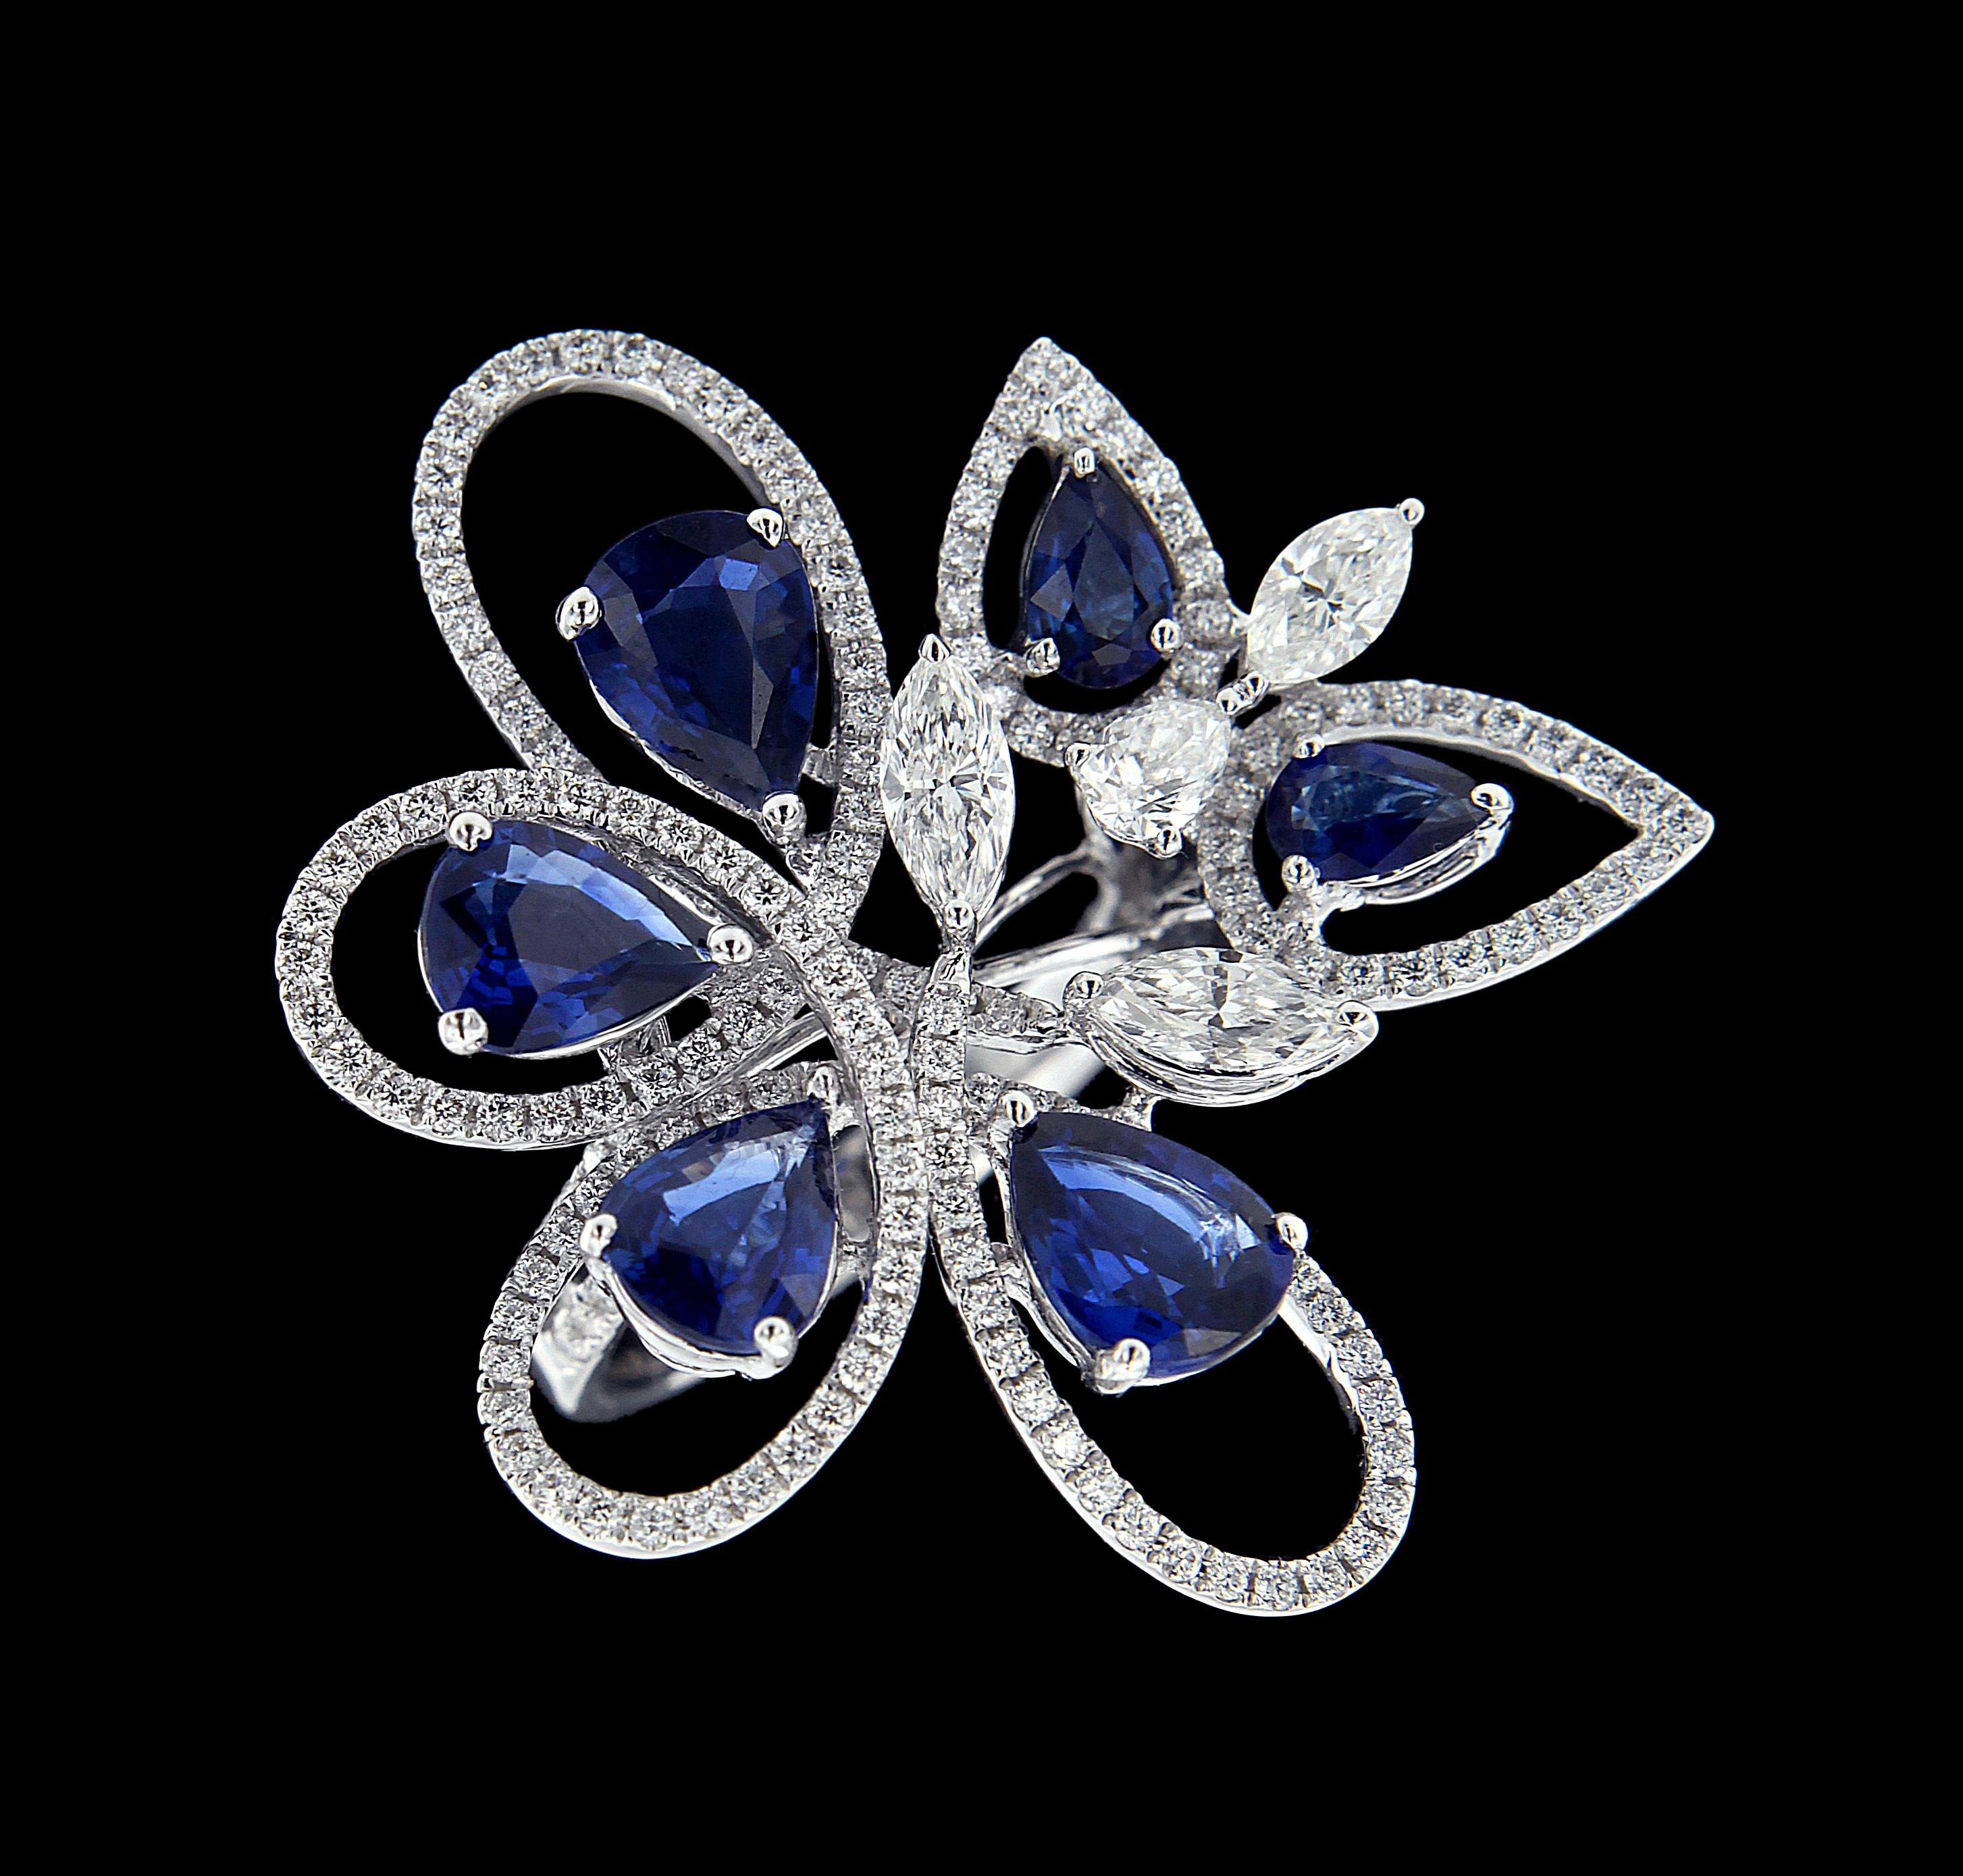 Charming 18 Karat White Gold, Diamond And Sapphire Set .
Rings 
Diamonds of approximately 2.137 carats and sapphires approximately of 6 5.245 carats, mounted on 18 karat white gold ring. The ring weighs approximately around 11.734 grams.

Please